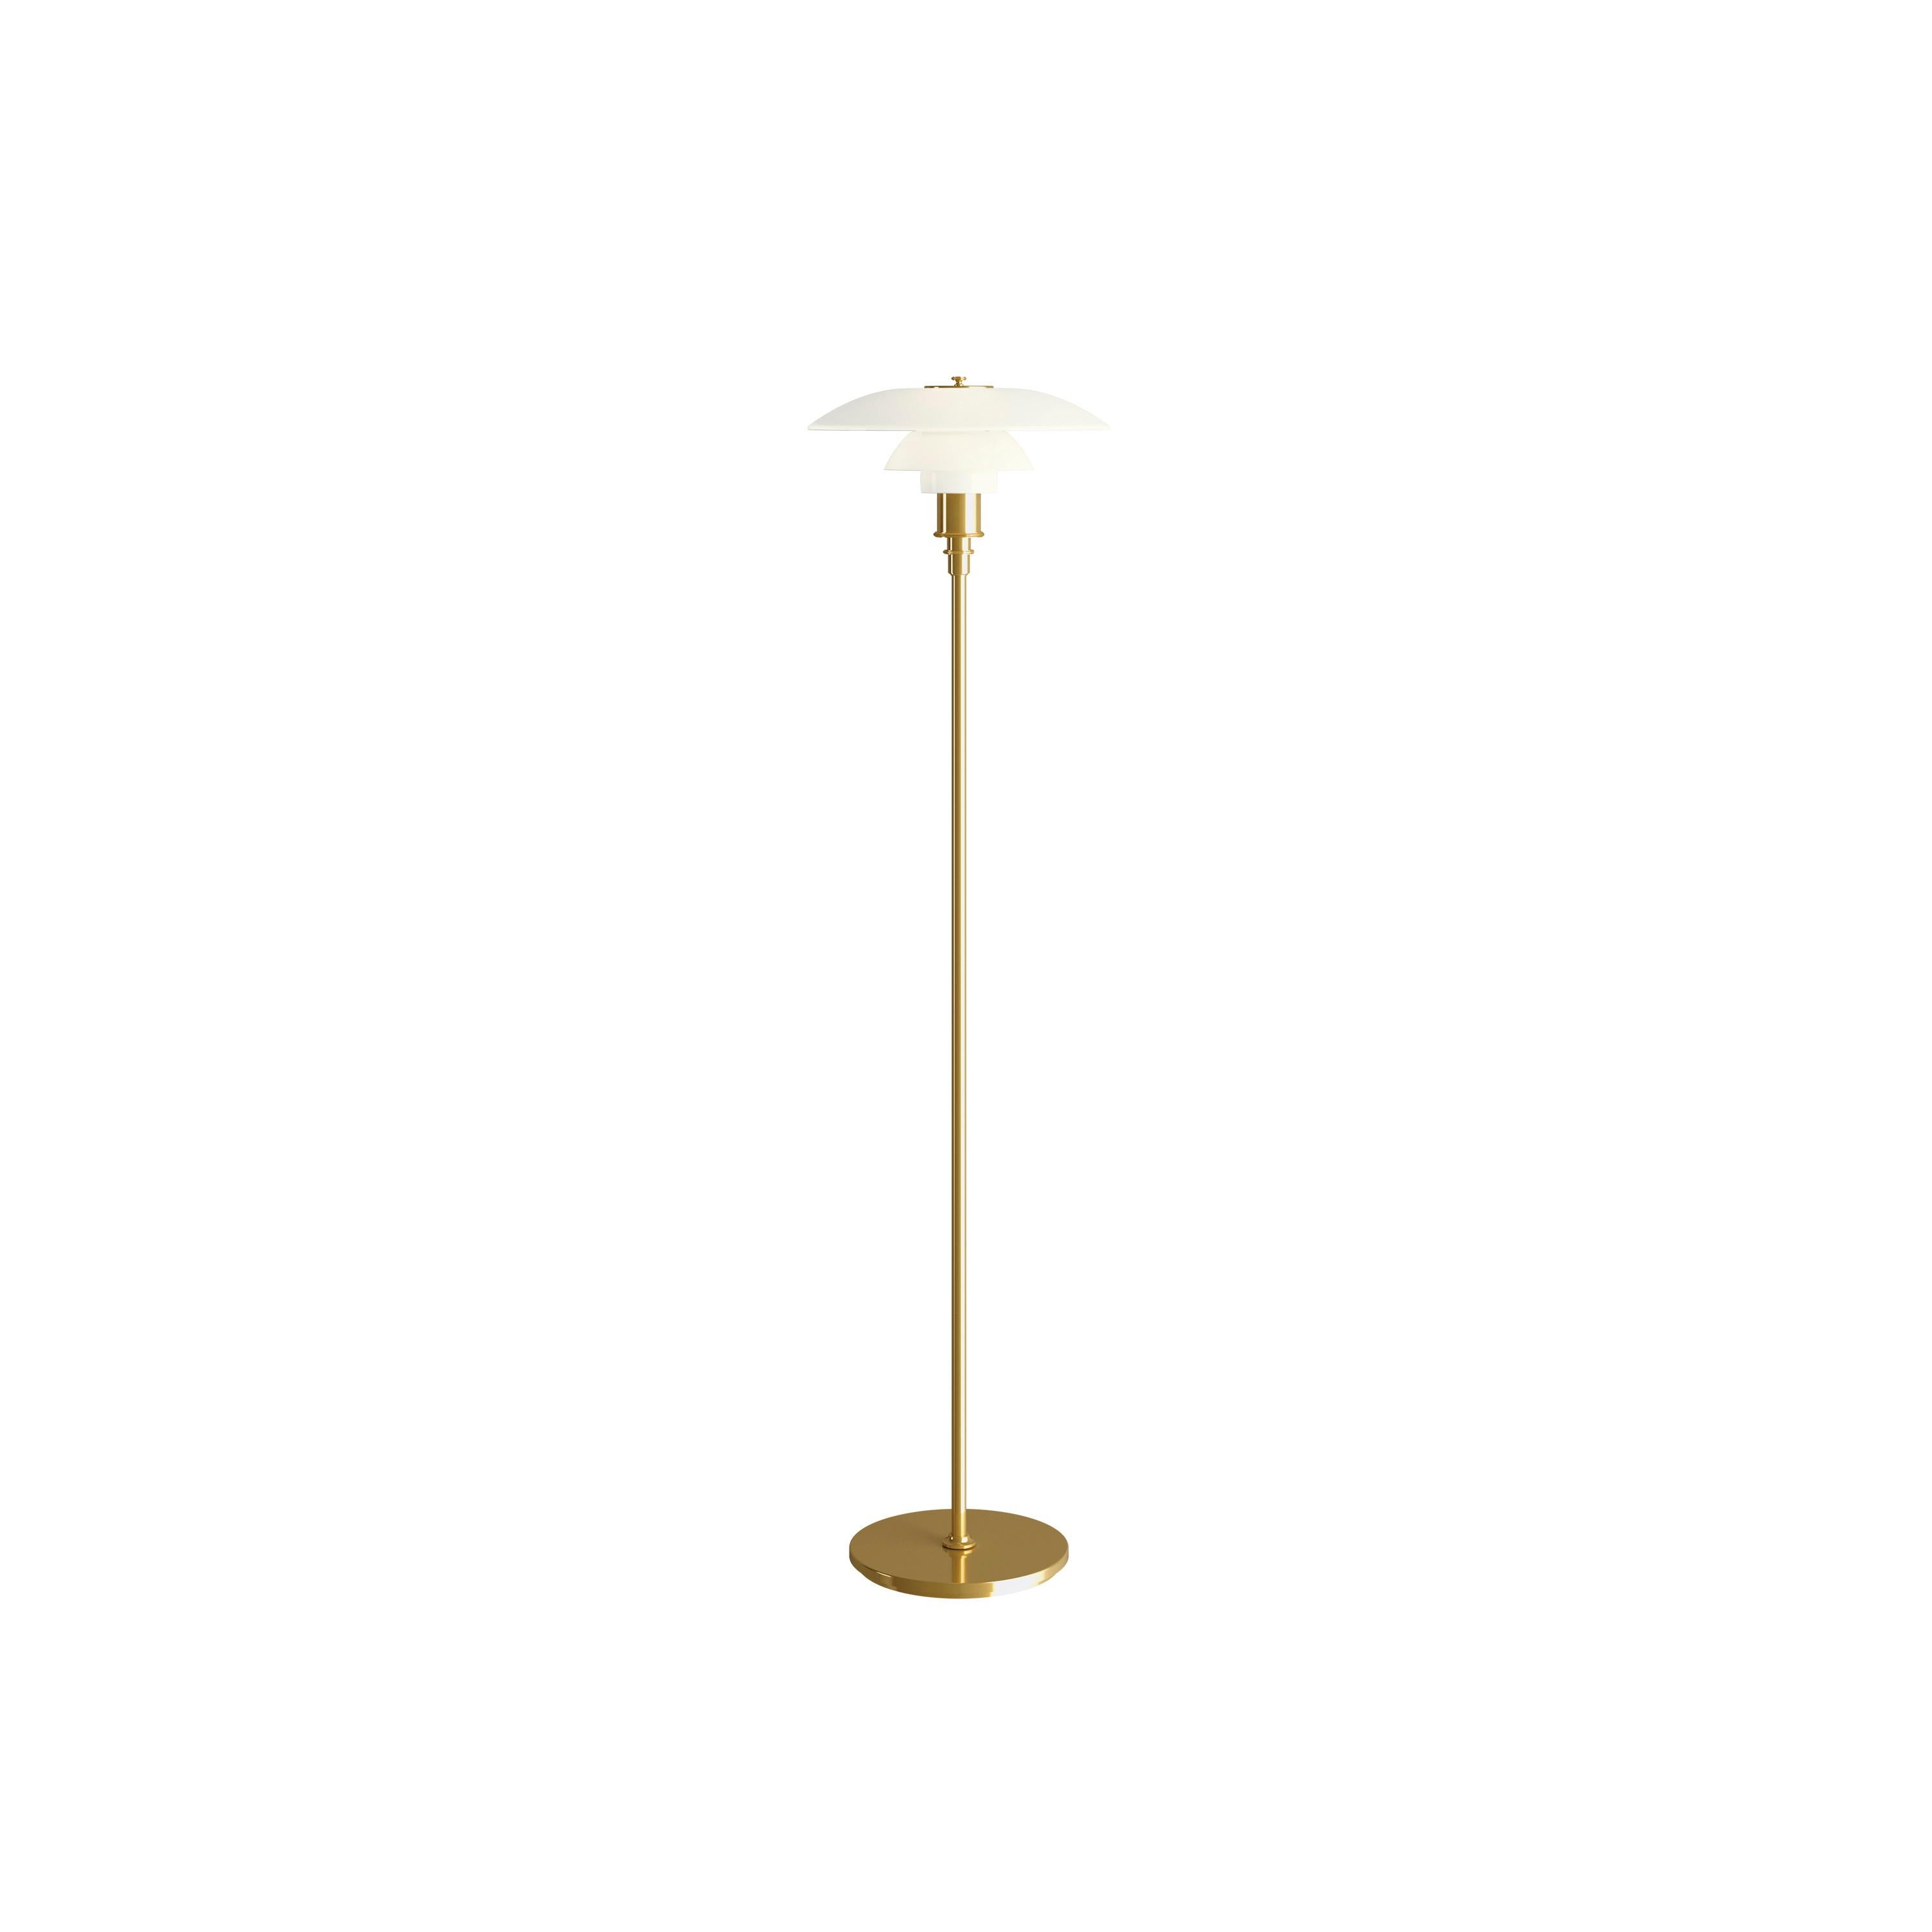 Louis Poulsen, floor light by Poul Henningsen
Measures: Width x height x length (mm)
330 x 1300 x 330, 6.8 kg
Material: Shades in mouth-blown white opal glass with the stem and base in brass and steel. Cord length 2.5 m Switch: On the cord.